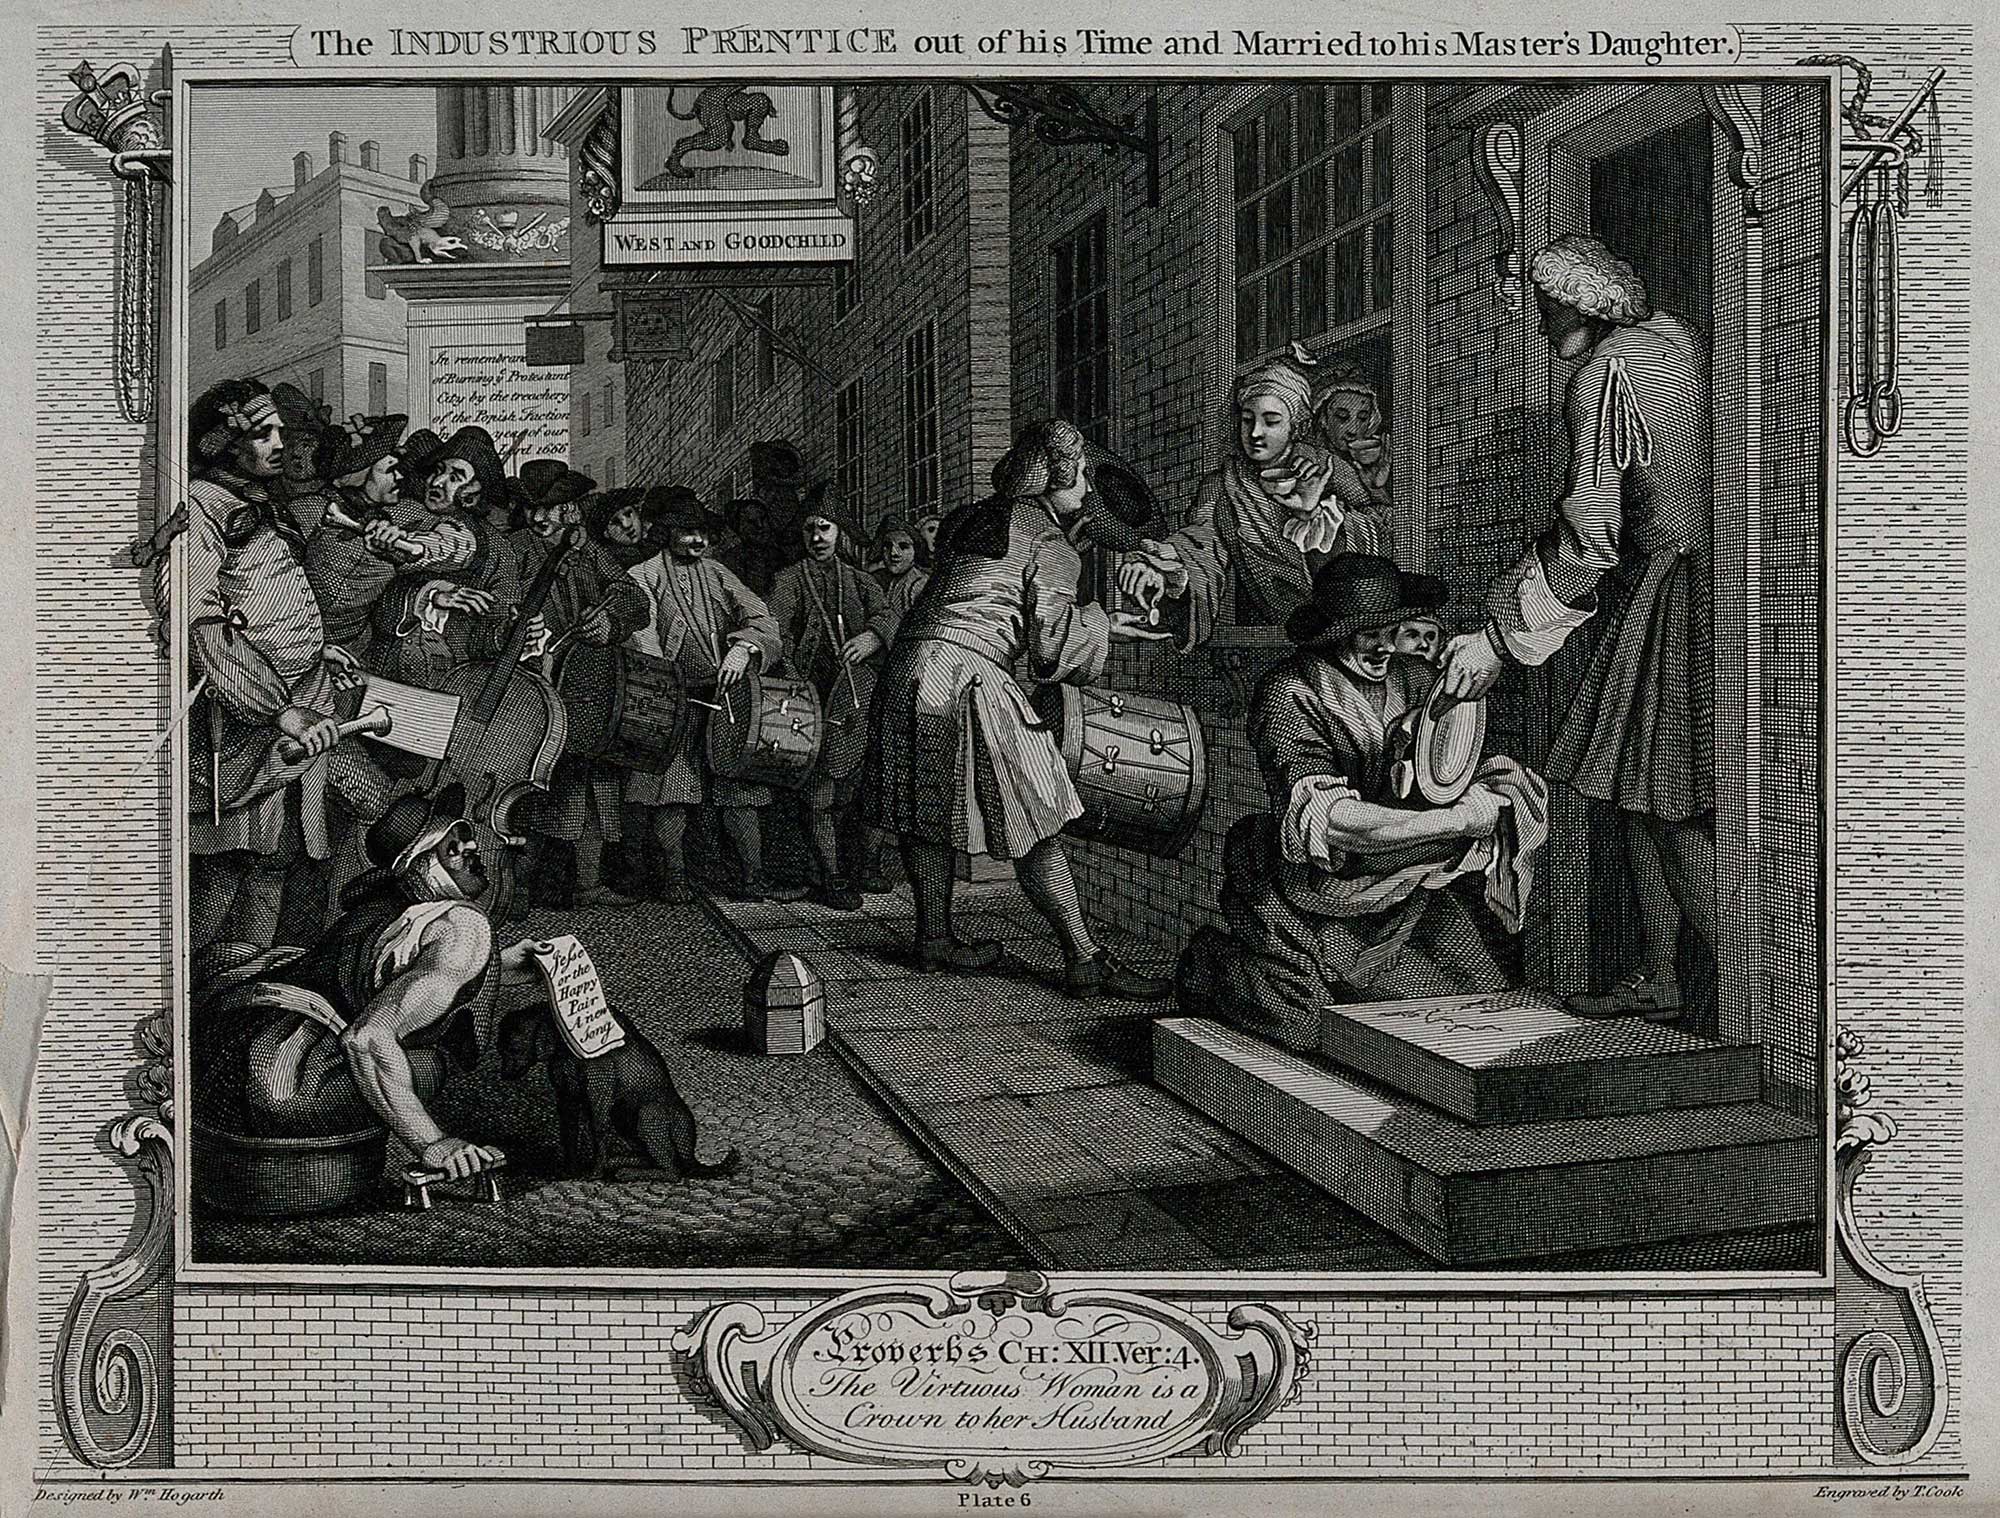 Drawing of a man sitting in a tub selling ballad sheets with a crowd some with drums.